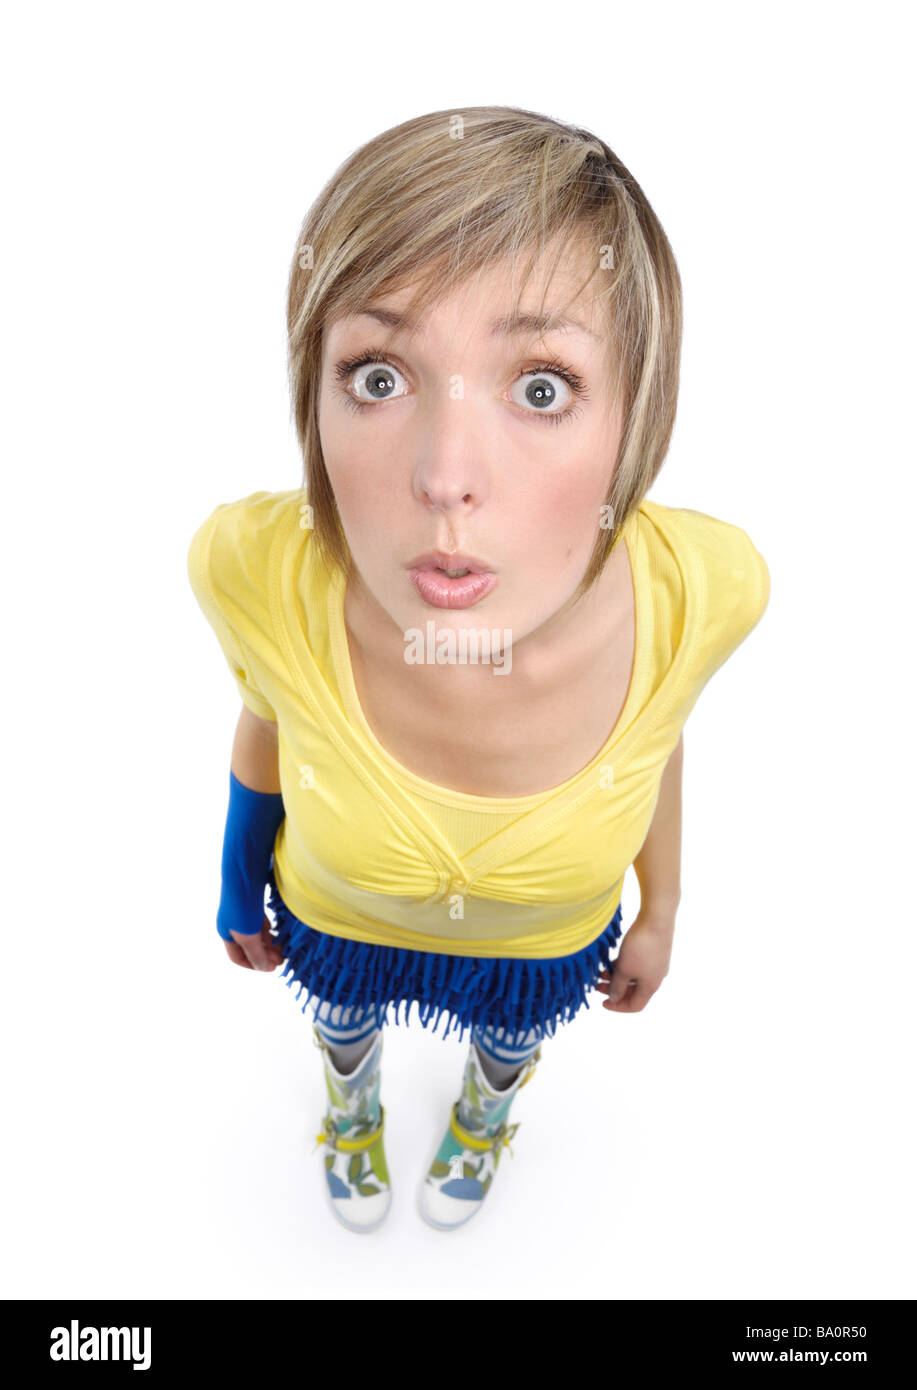 Curious young woman Stock Photo